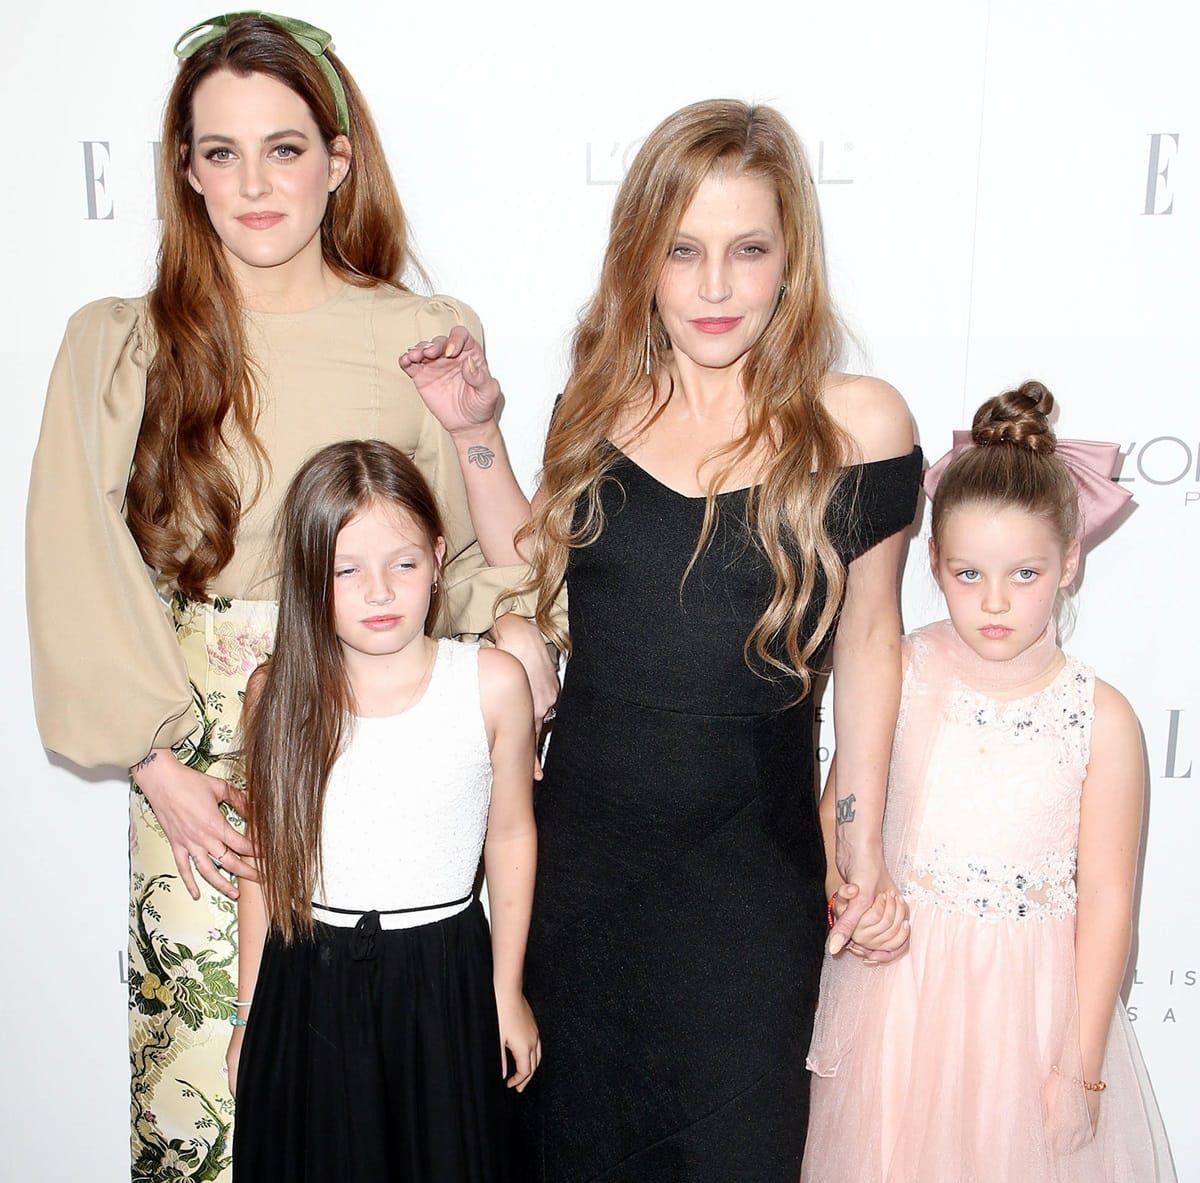 Lisa Marie Presley and her three daughters, Riley Keough and twins Finley and Harper Lockwood, made a rare family appearance at the Elle Women in Hollywood event